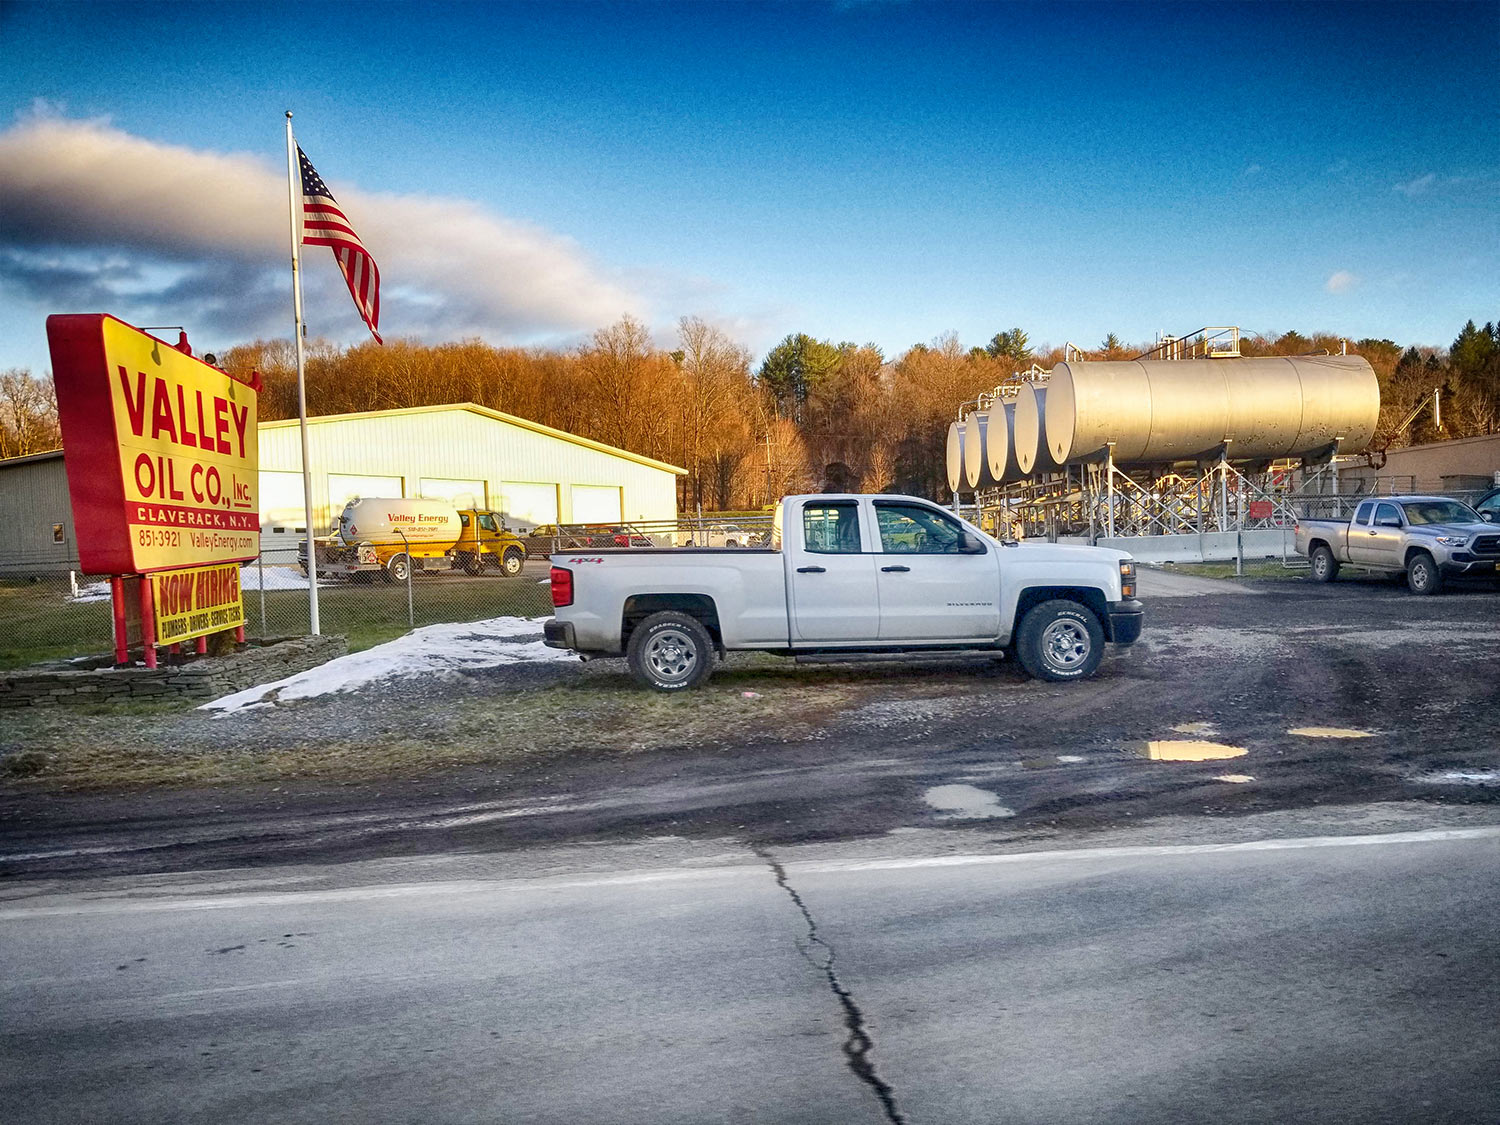 Valley Oil, Claverack, NY©2021 by bret wills